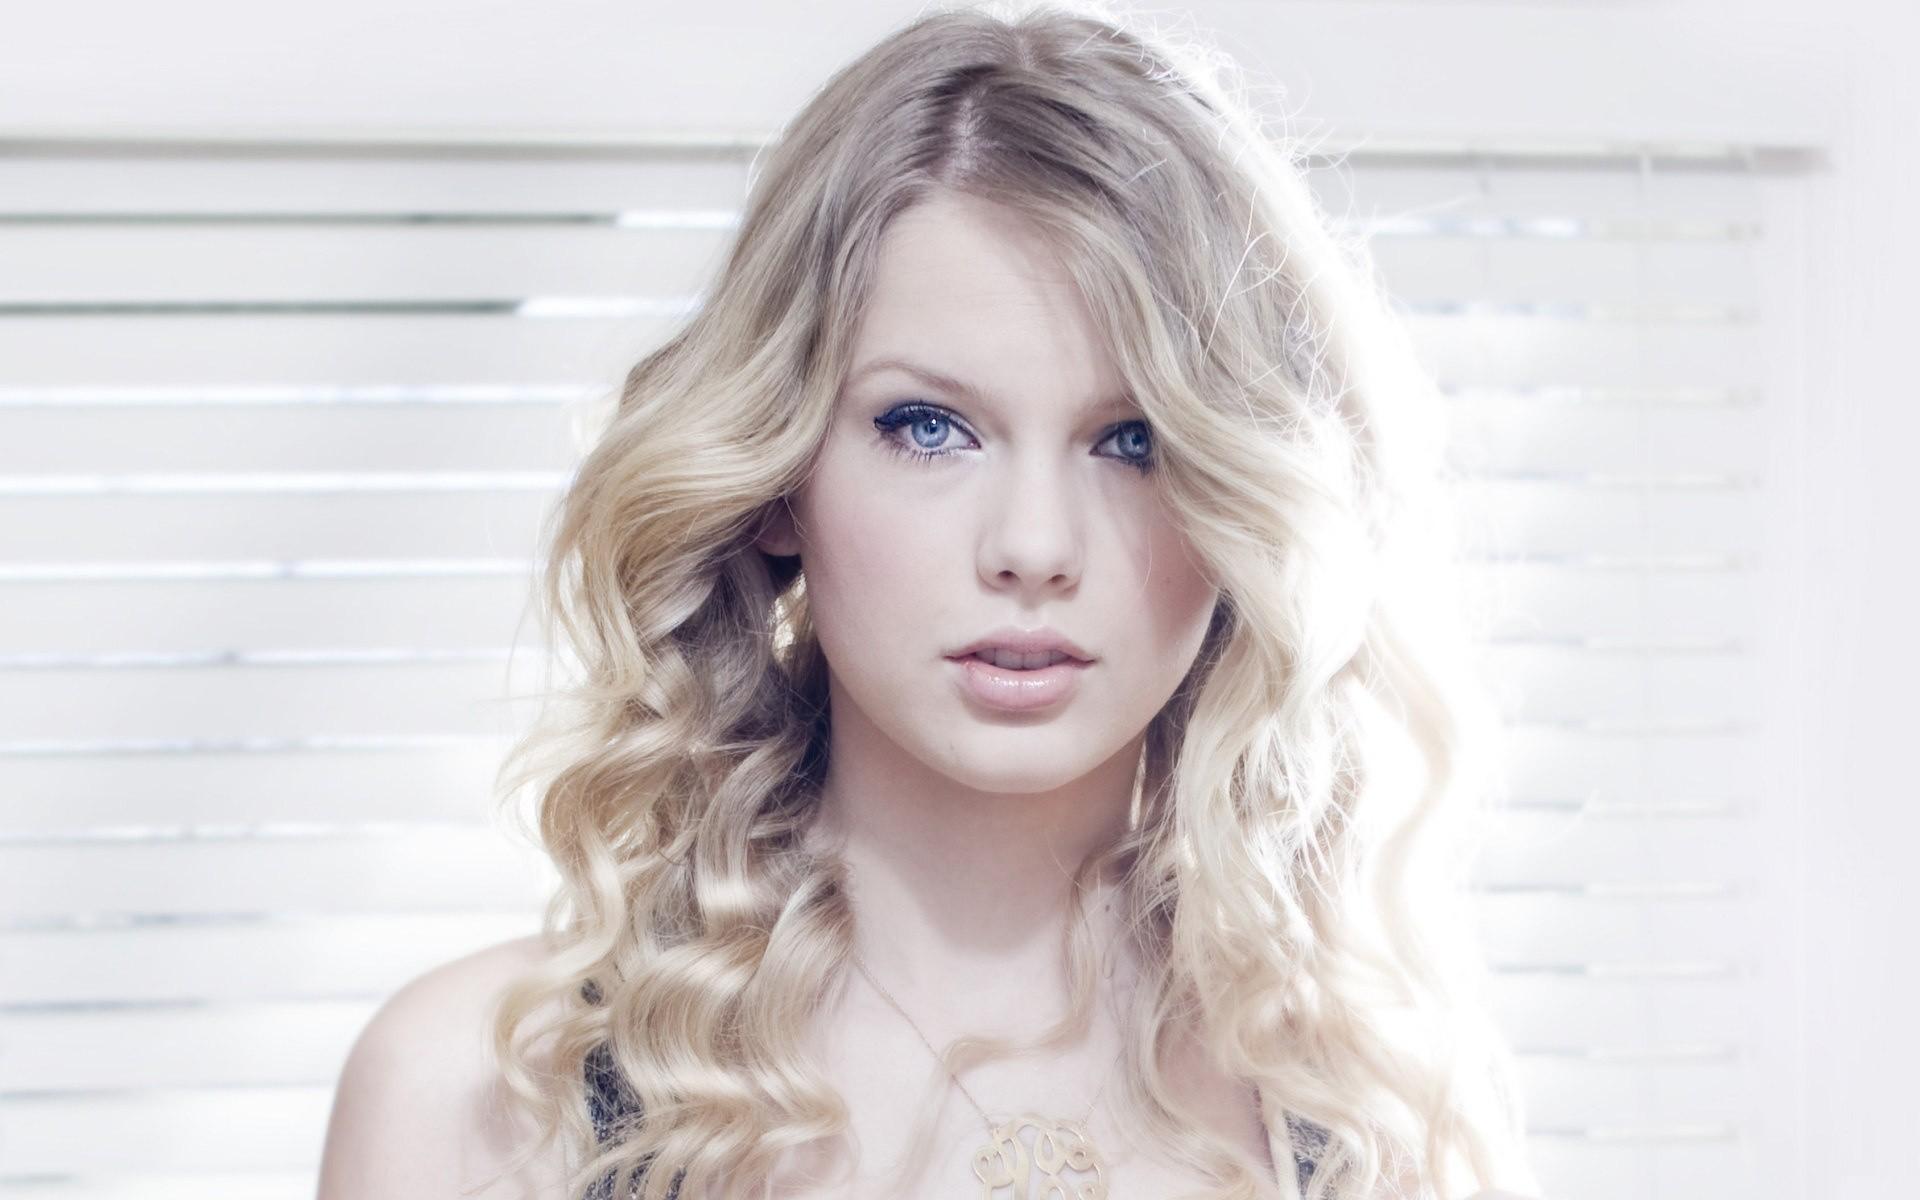 Taylor Swift Wallpaper 4 wallpapers55.com - Best Wallpapers for